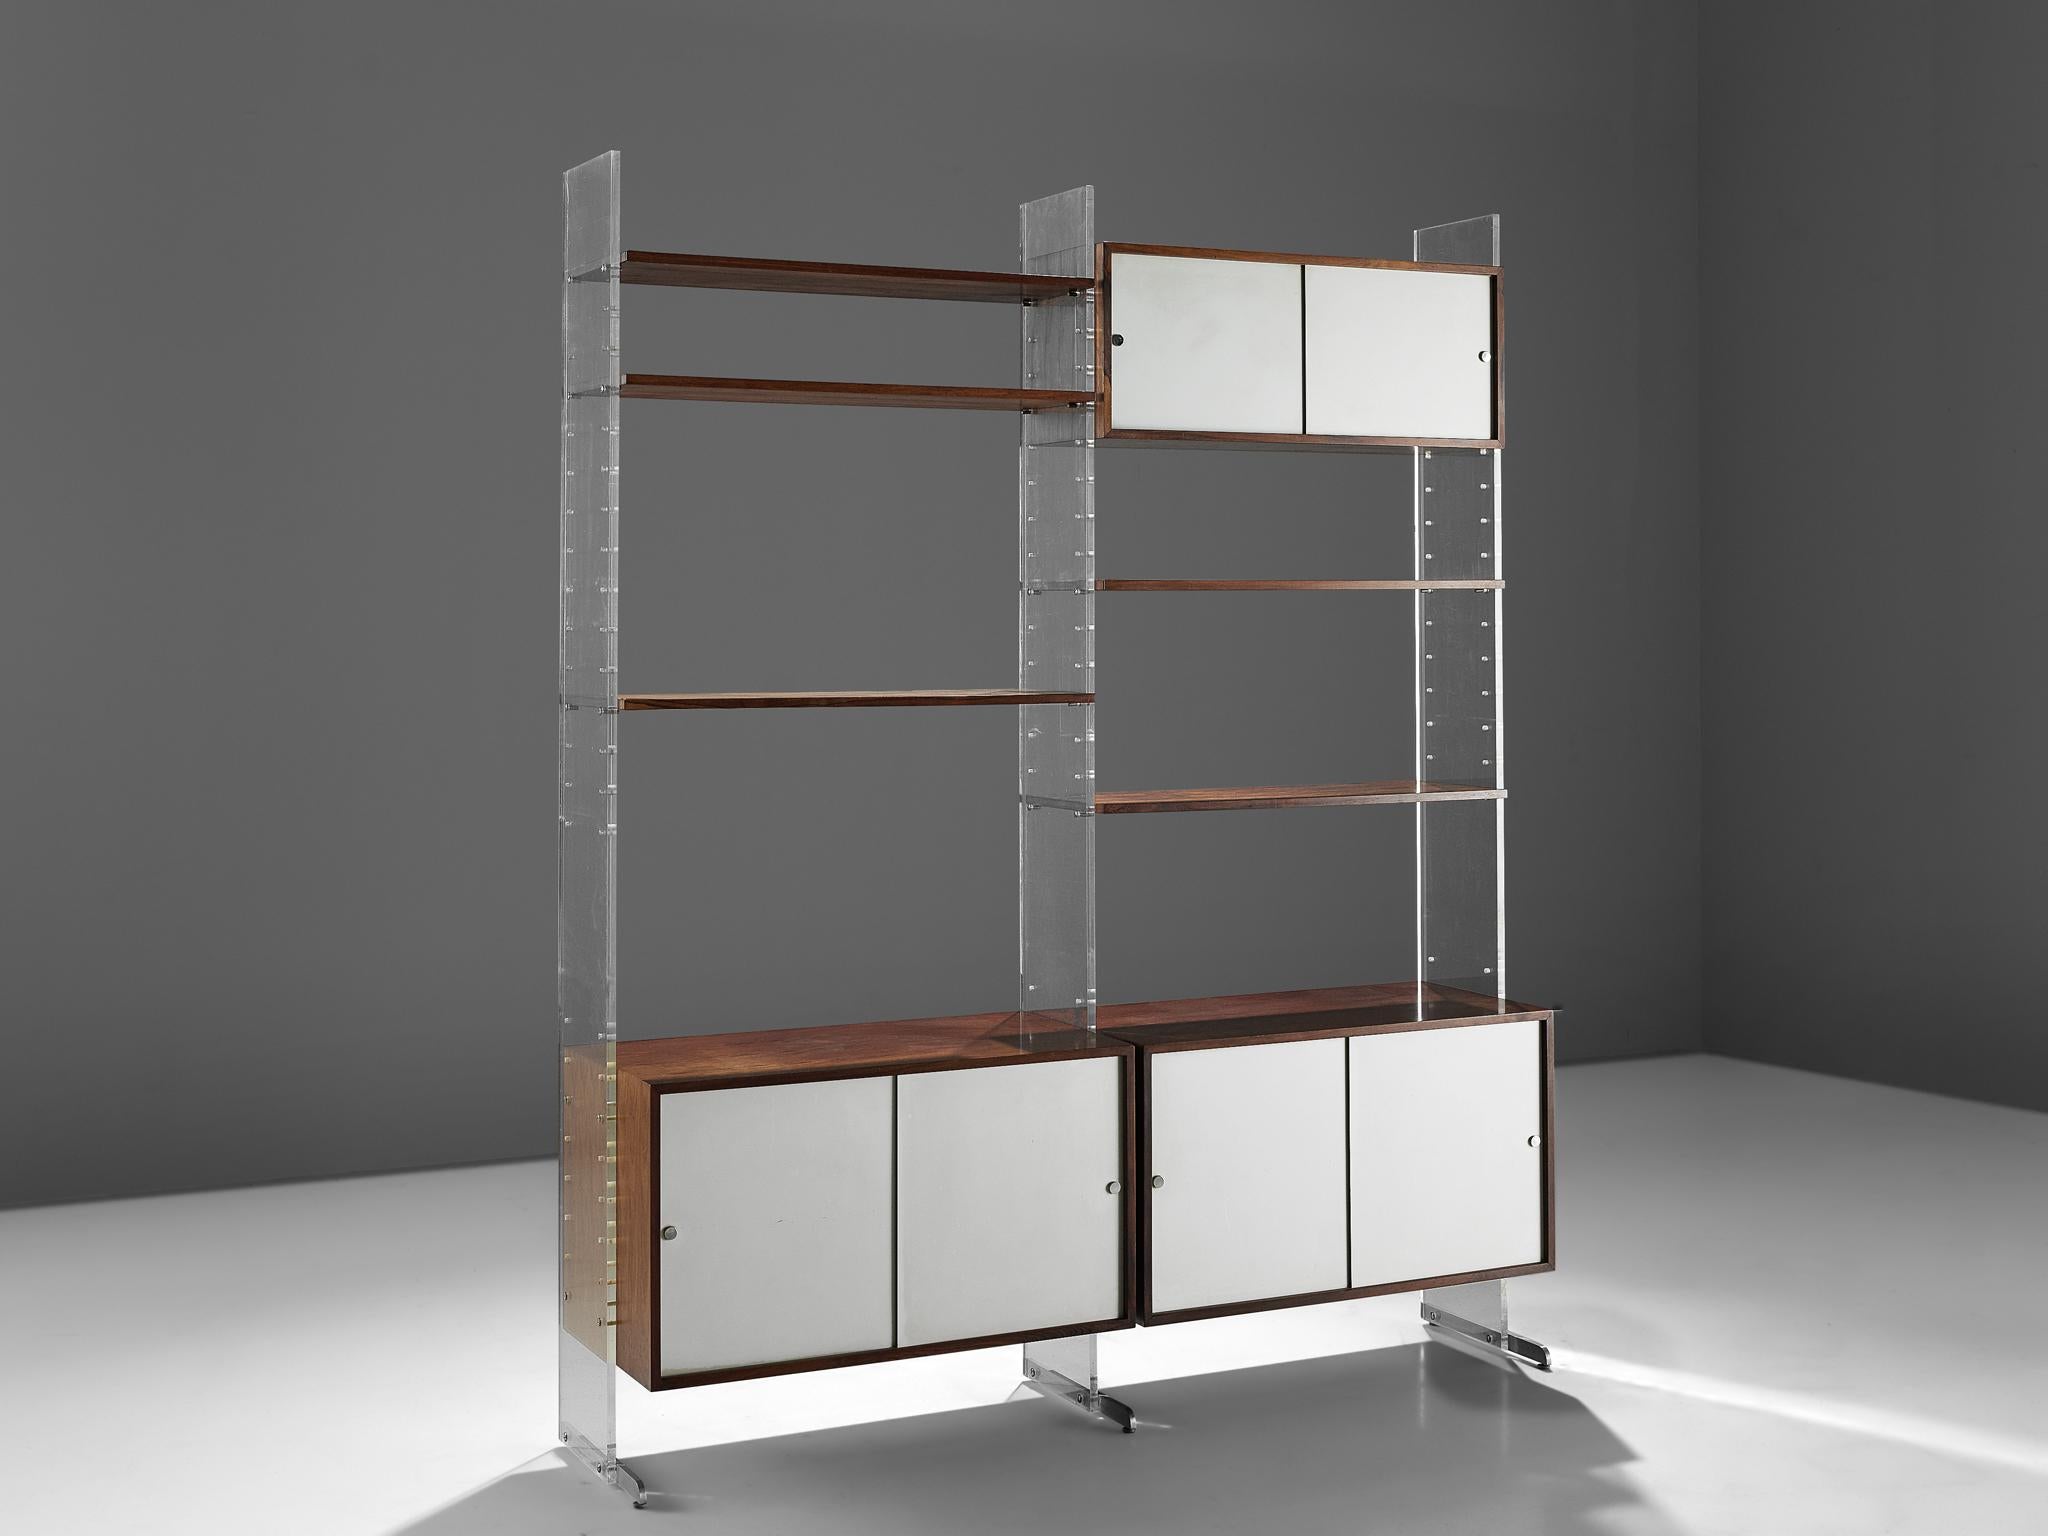 Poul Norreklit for Georg Petersens Møbelfabrik, 'Selectform' wall system, rosewood, aluminum and plexiglass, Denmark, late 1960s.

A substantial and functional storage system consisting of three sliding door cabinets and five shelves. The case